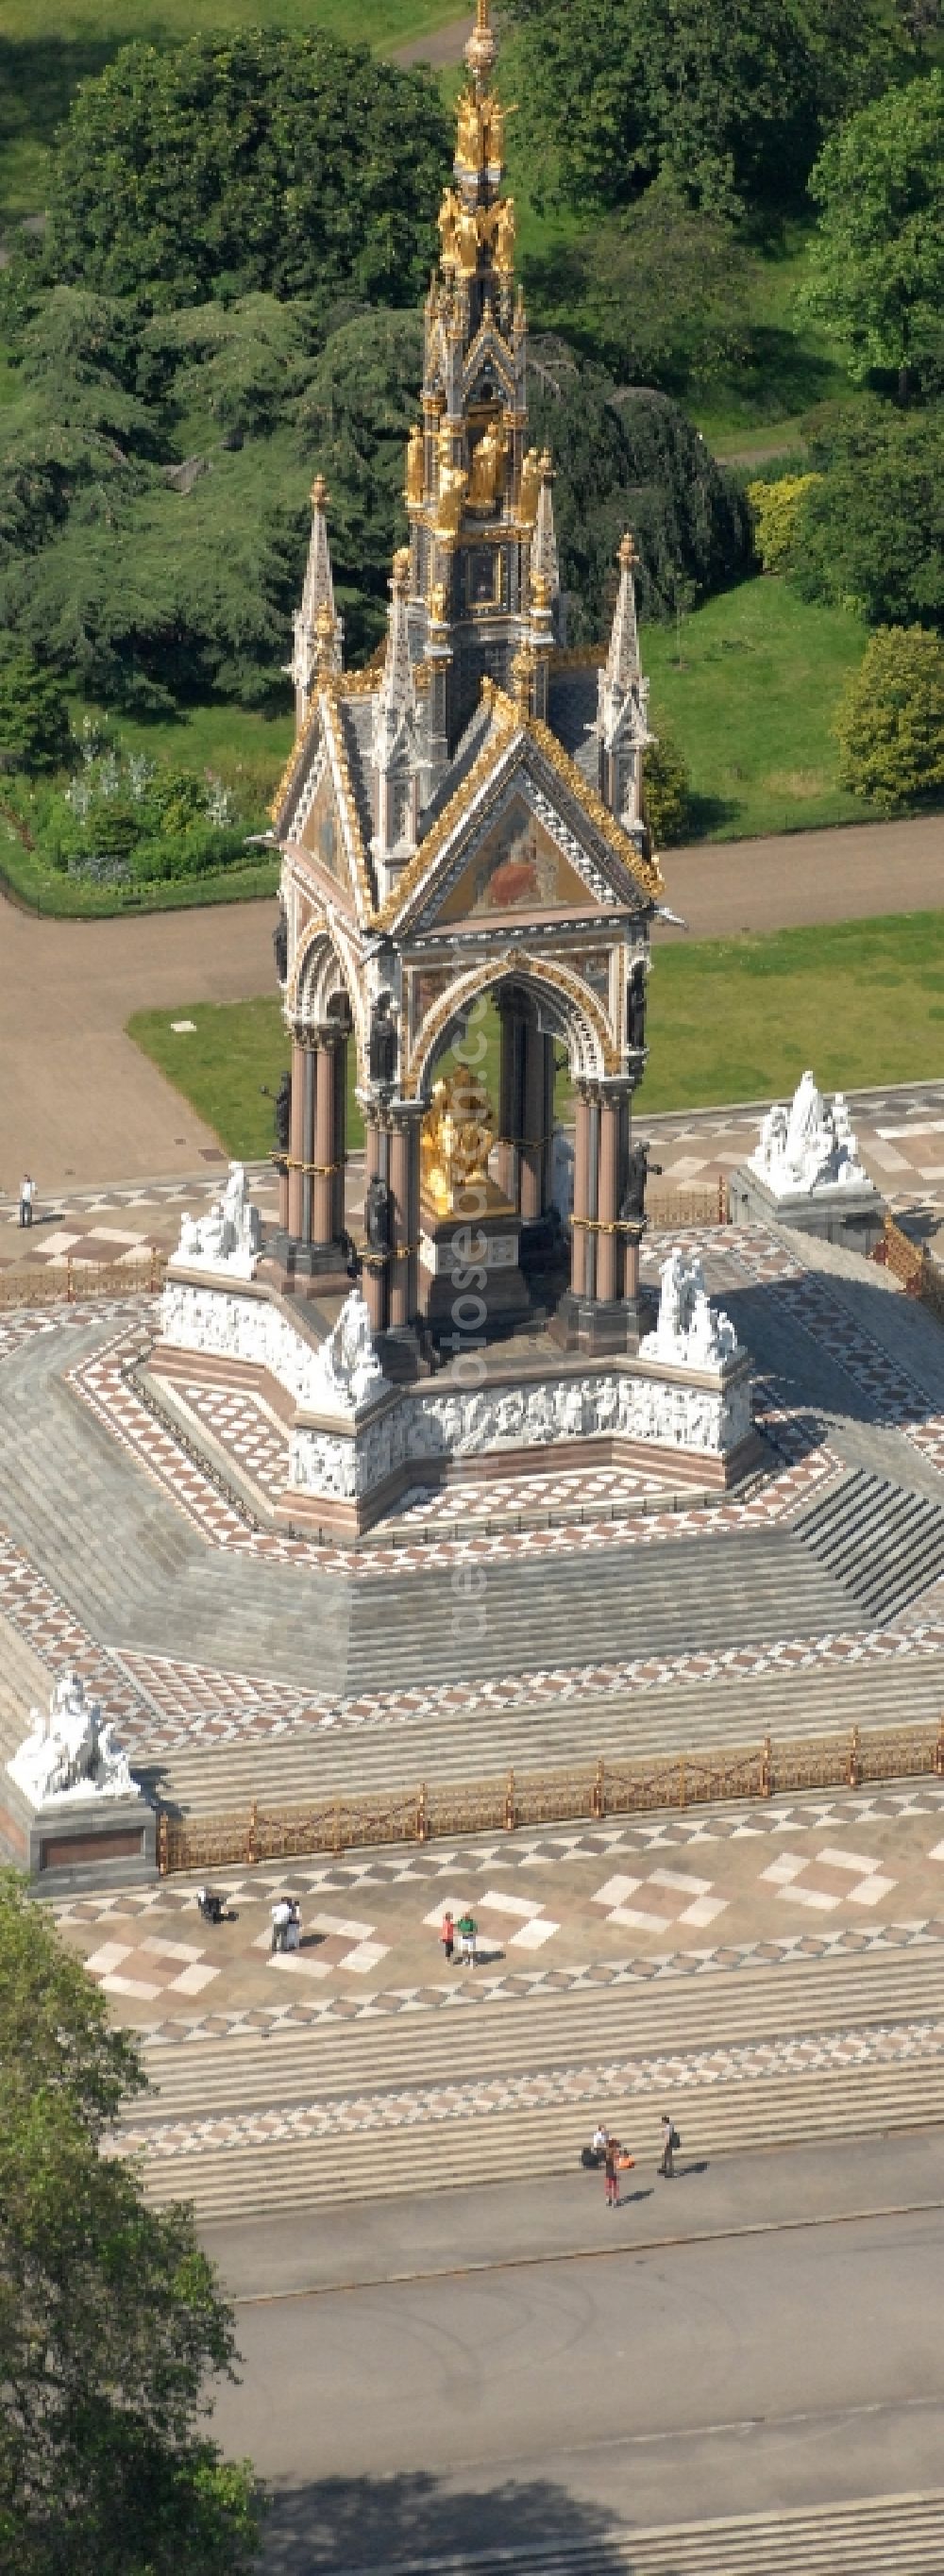 London from above - View of the Albert Memorial in Kensington Gardens in London. The Albert Memorial was commissioned by Queen Victoria of Great Britain and Ireland in memory of Albert of Saxe-Coburg and Gotha in order. It was built by Sir George Gilbert Scott in the years 1864-1875 in the Gothic Revival style